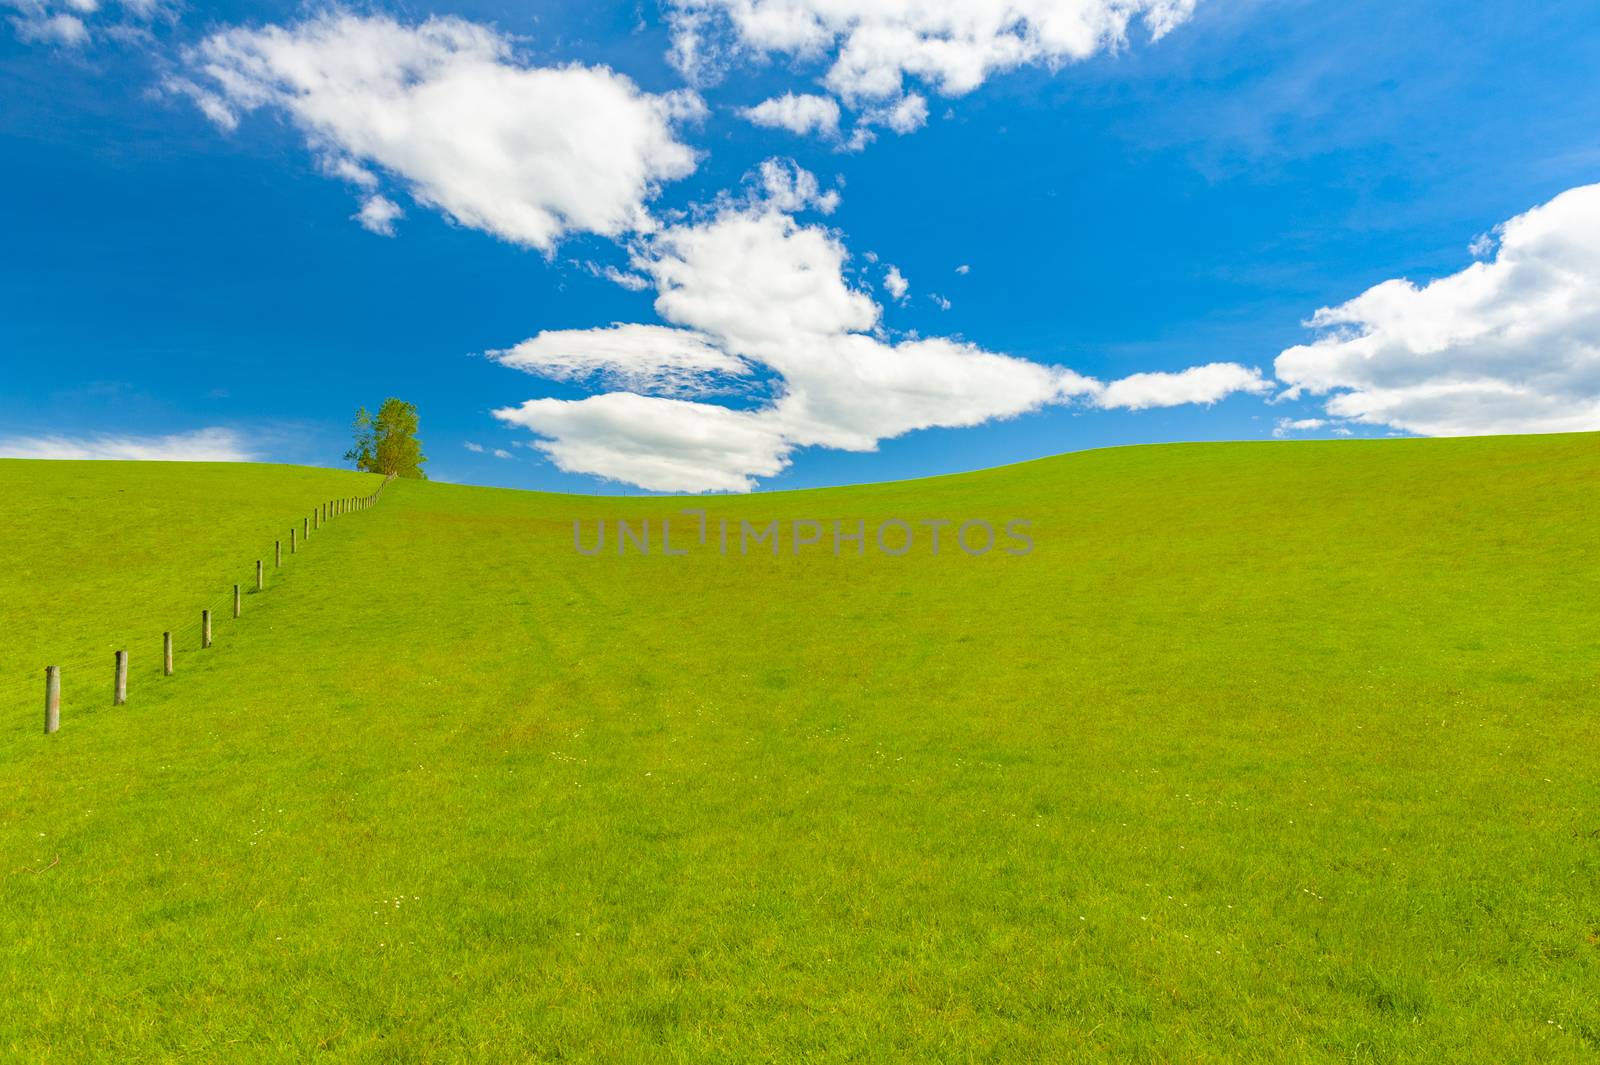 Fresh green spring field in the New Zealand with a blue sky